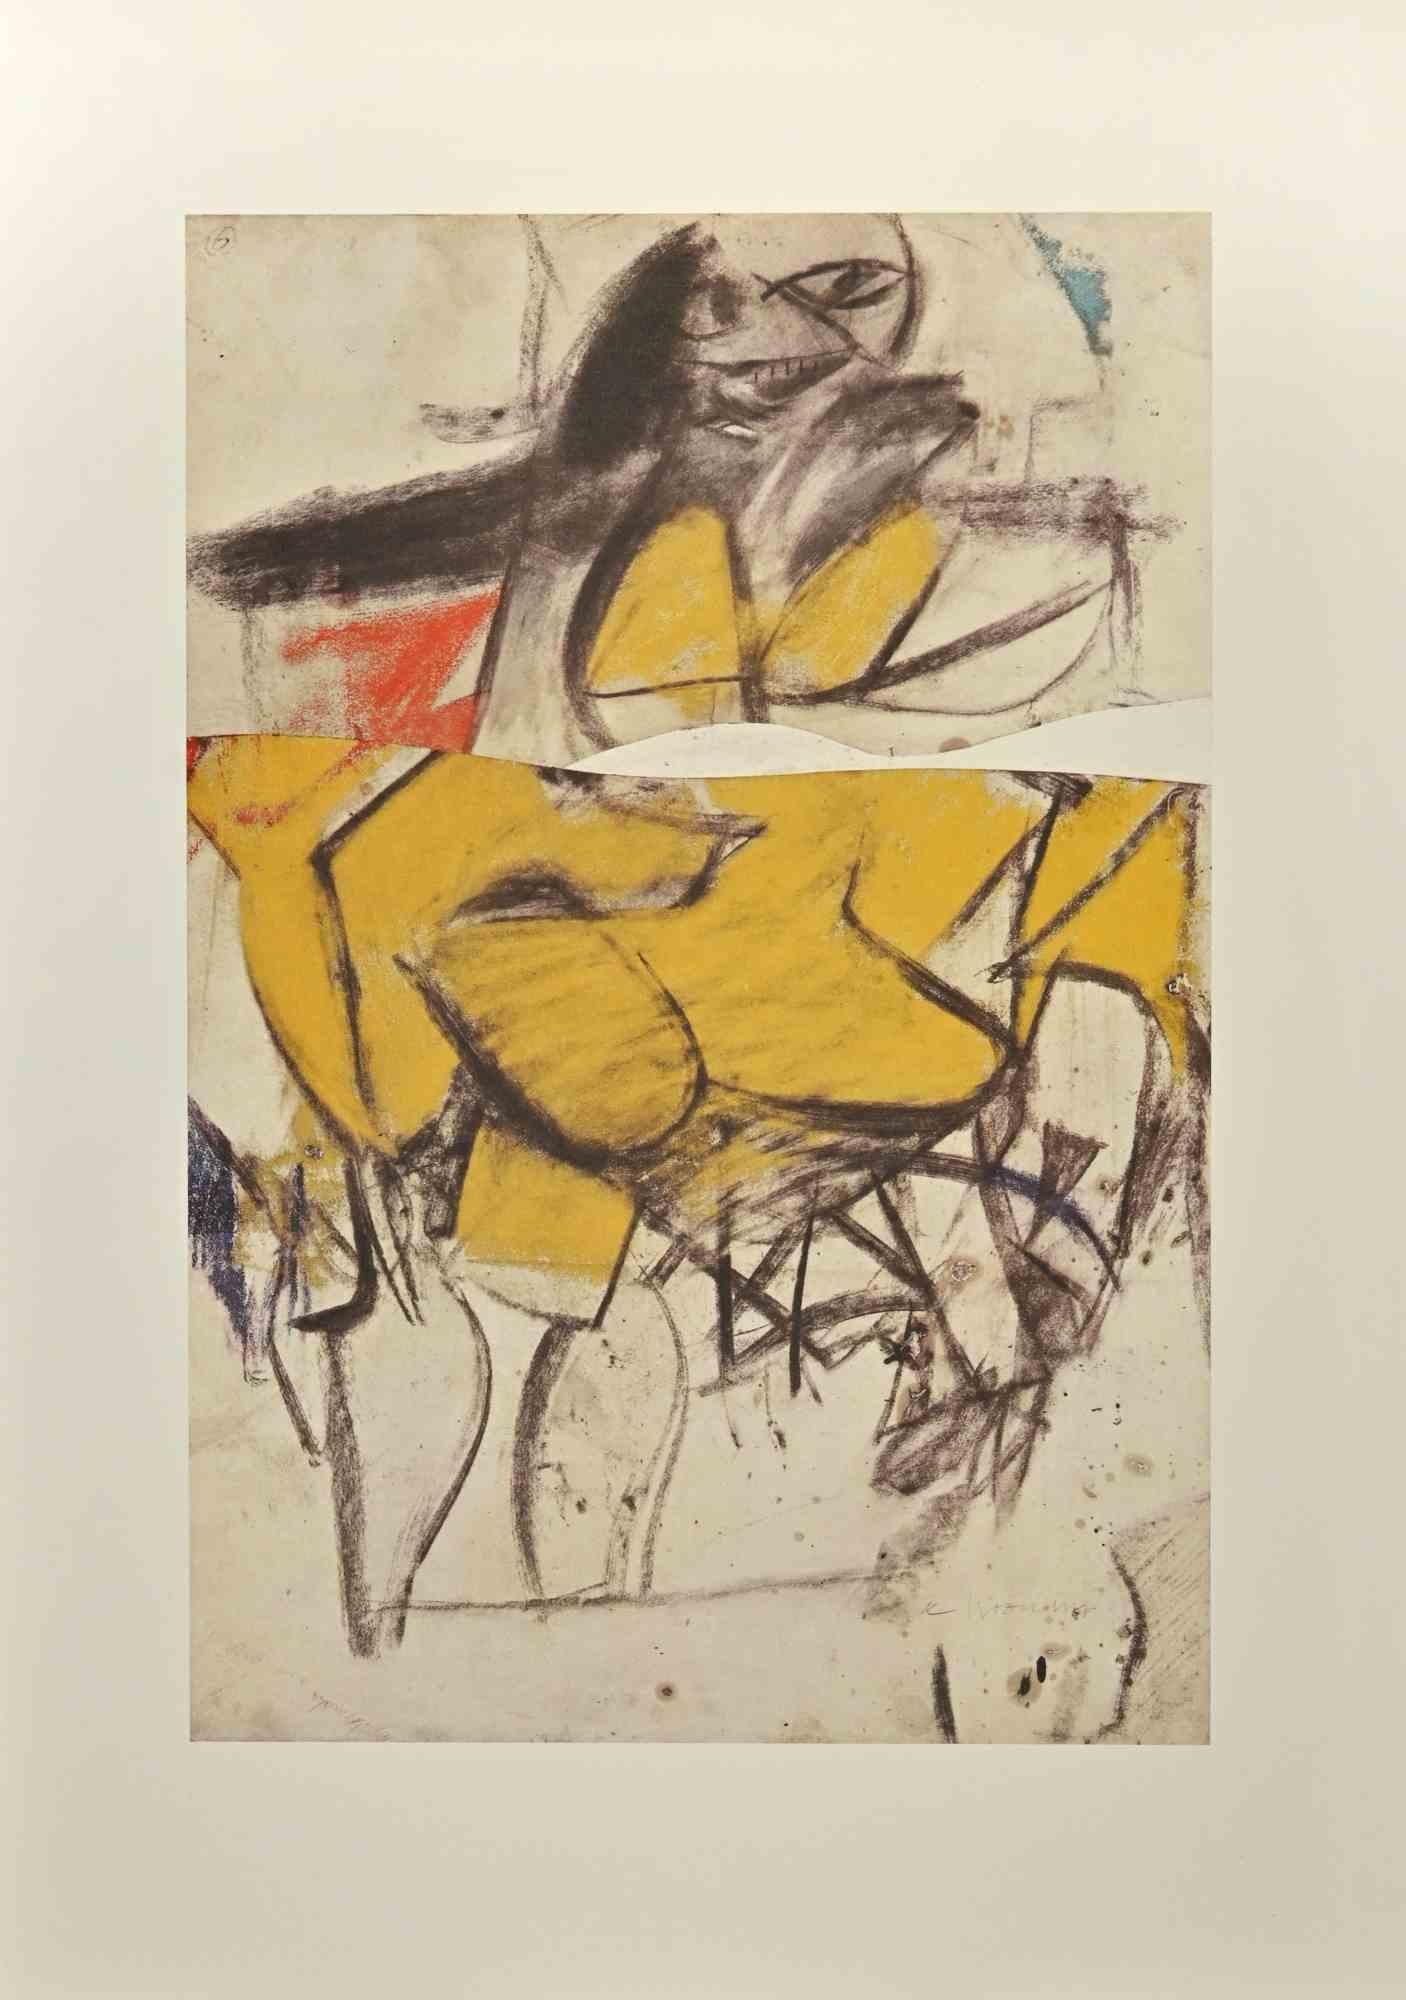 Woman - Offset and Lithograph after Willem De Kooning - 1985